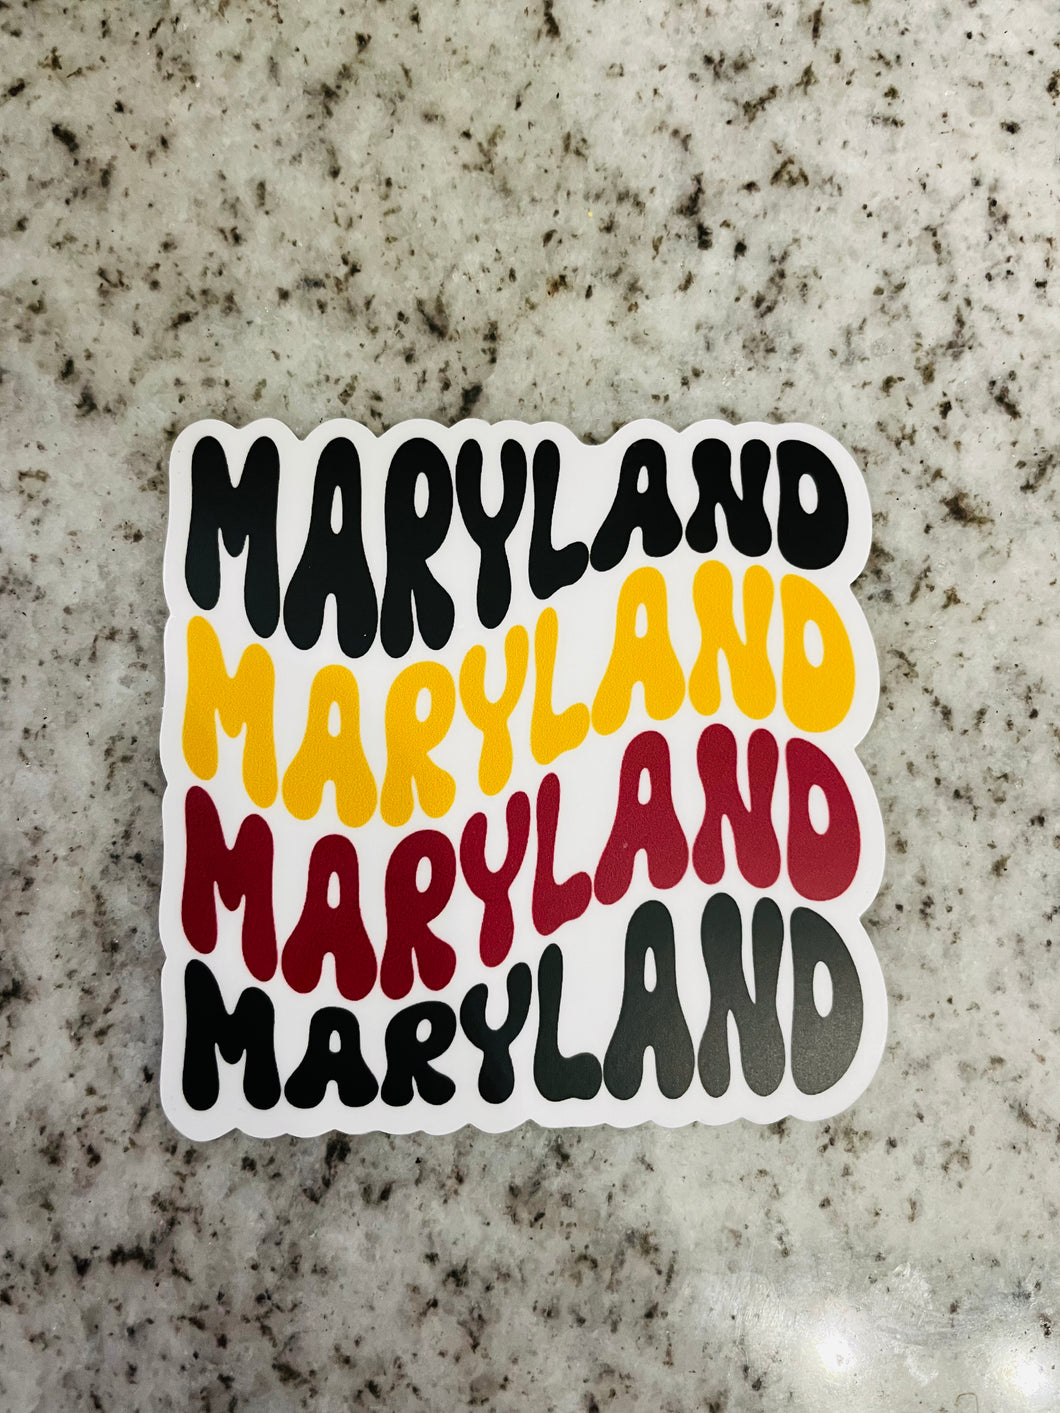 Maryland repeating sticker